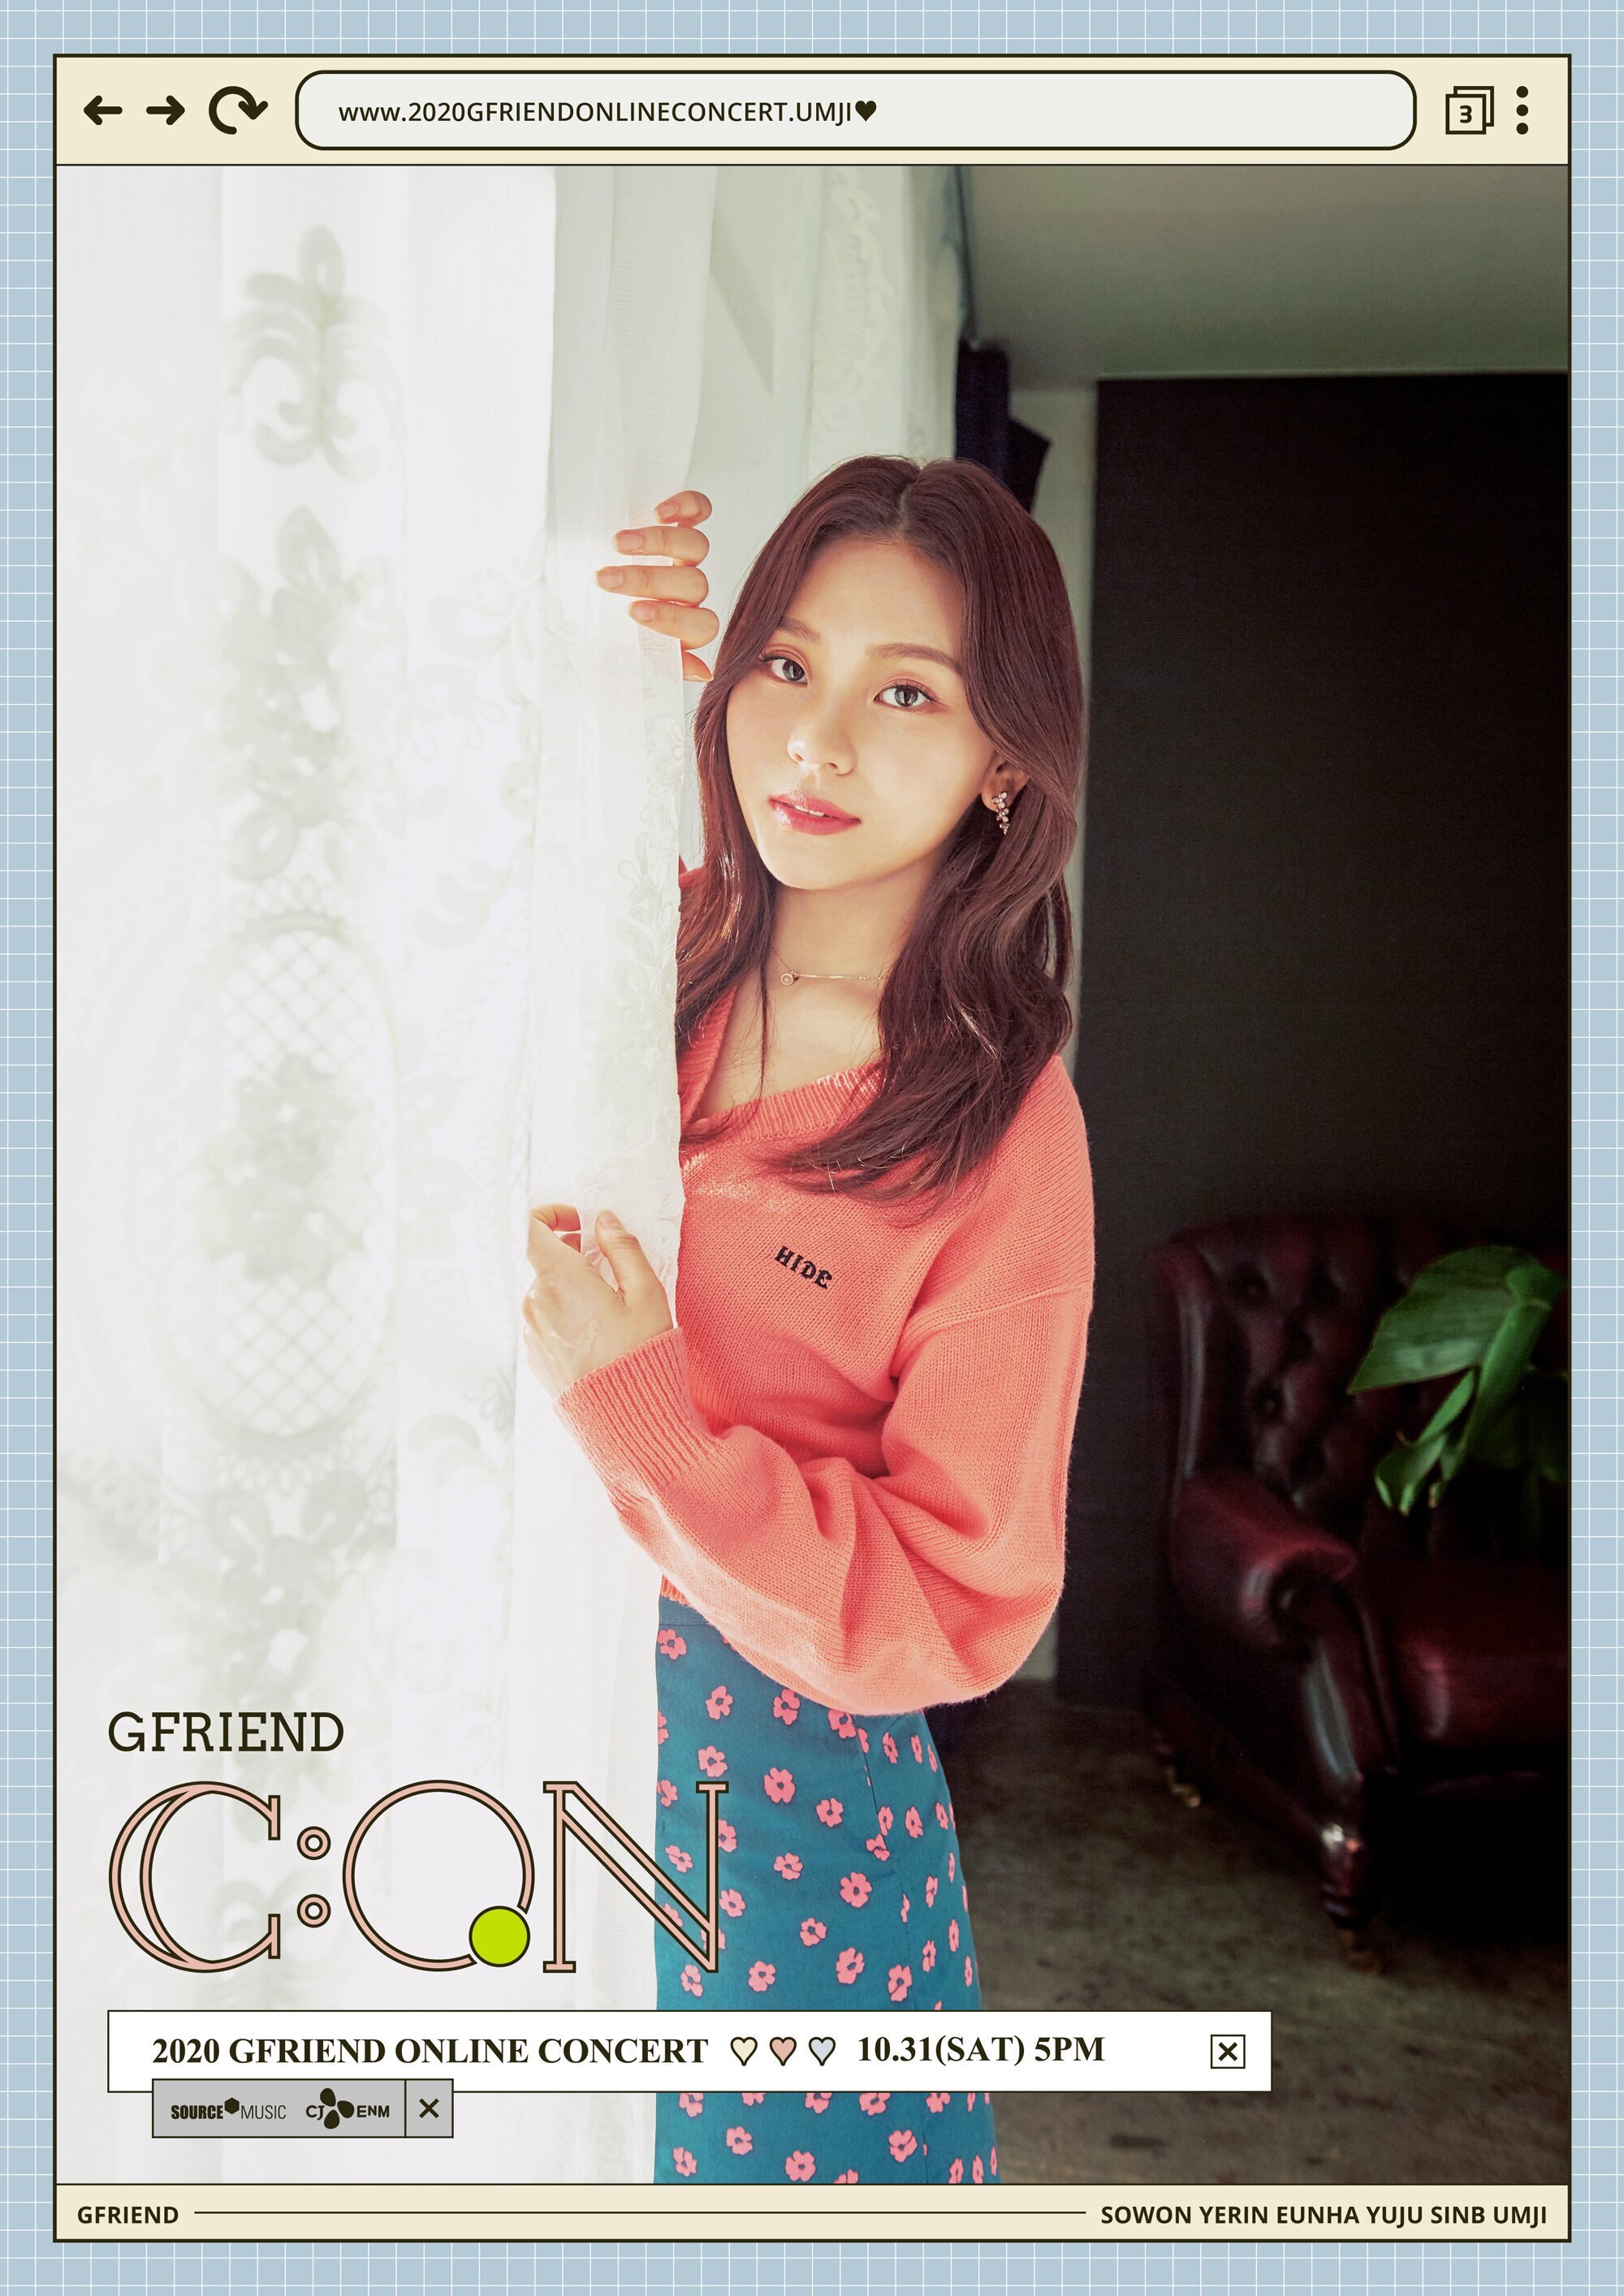 GFRIEND Online Concert 'G:Con' promotion posters | kpopping